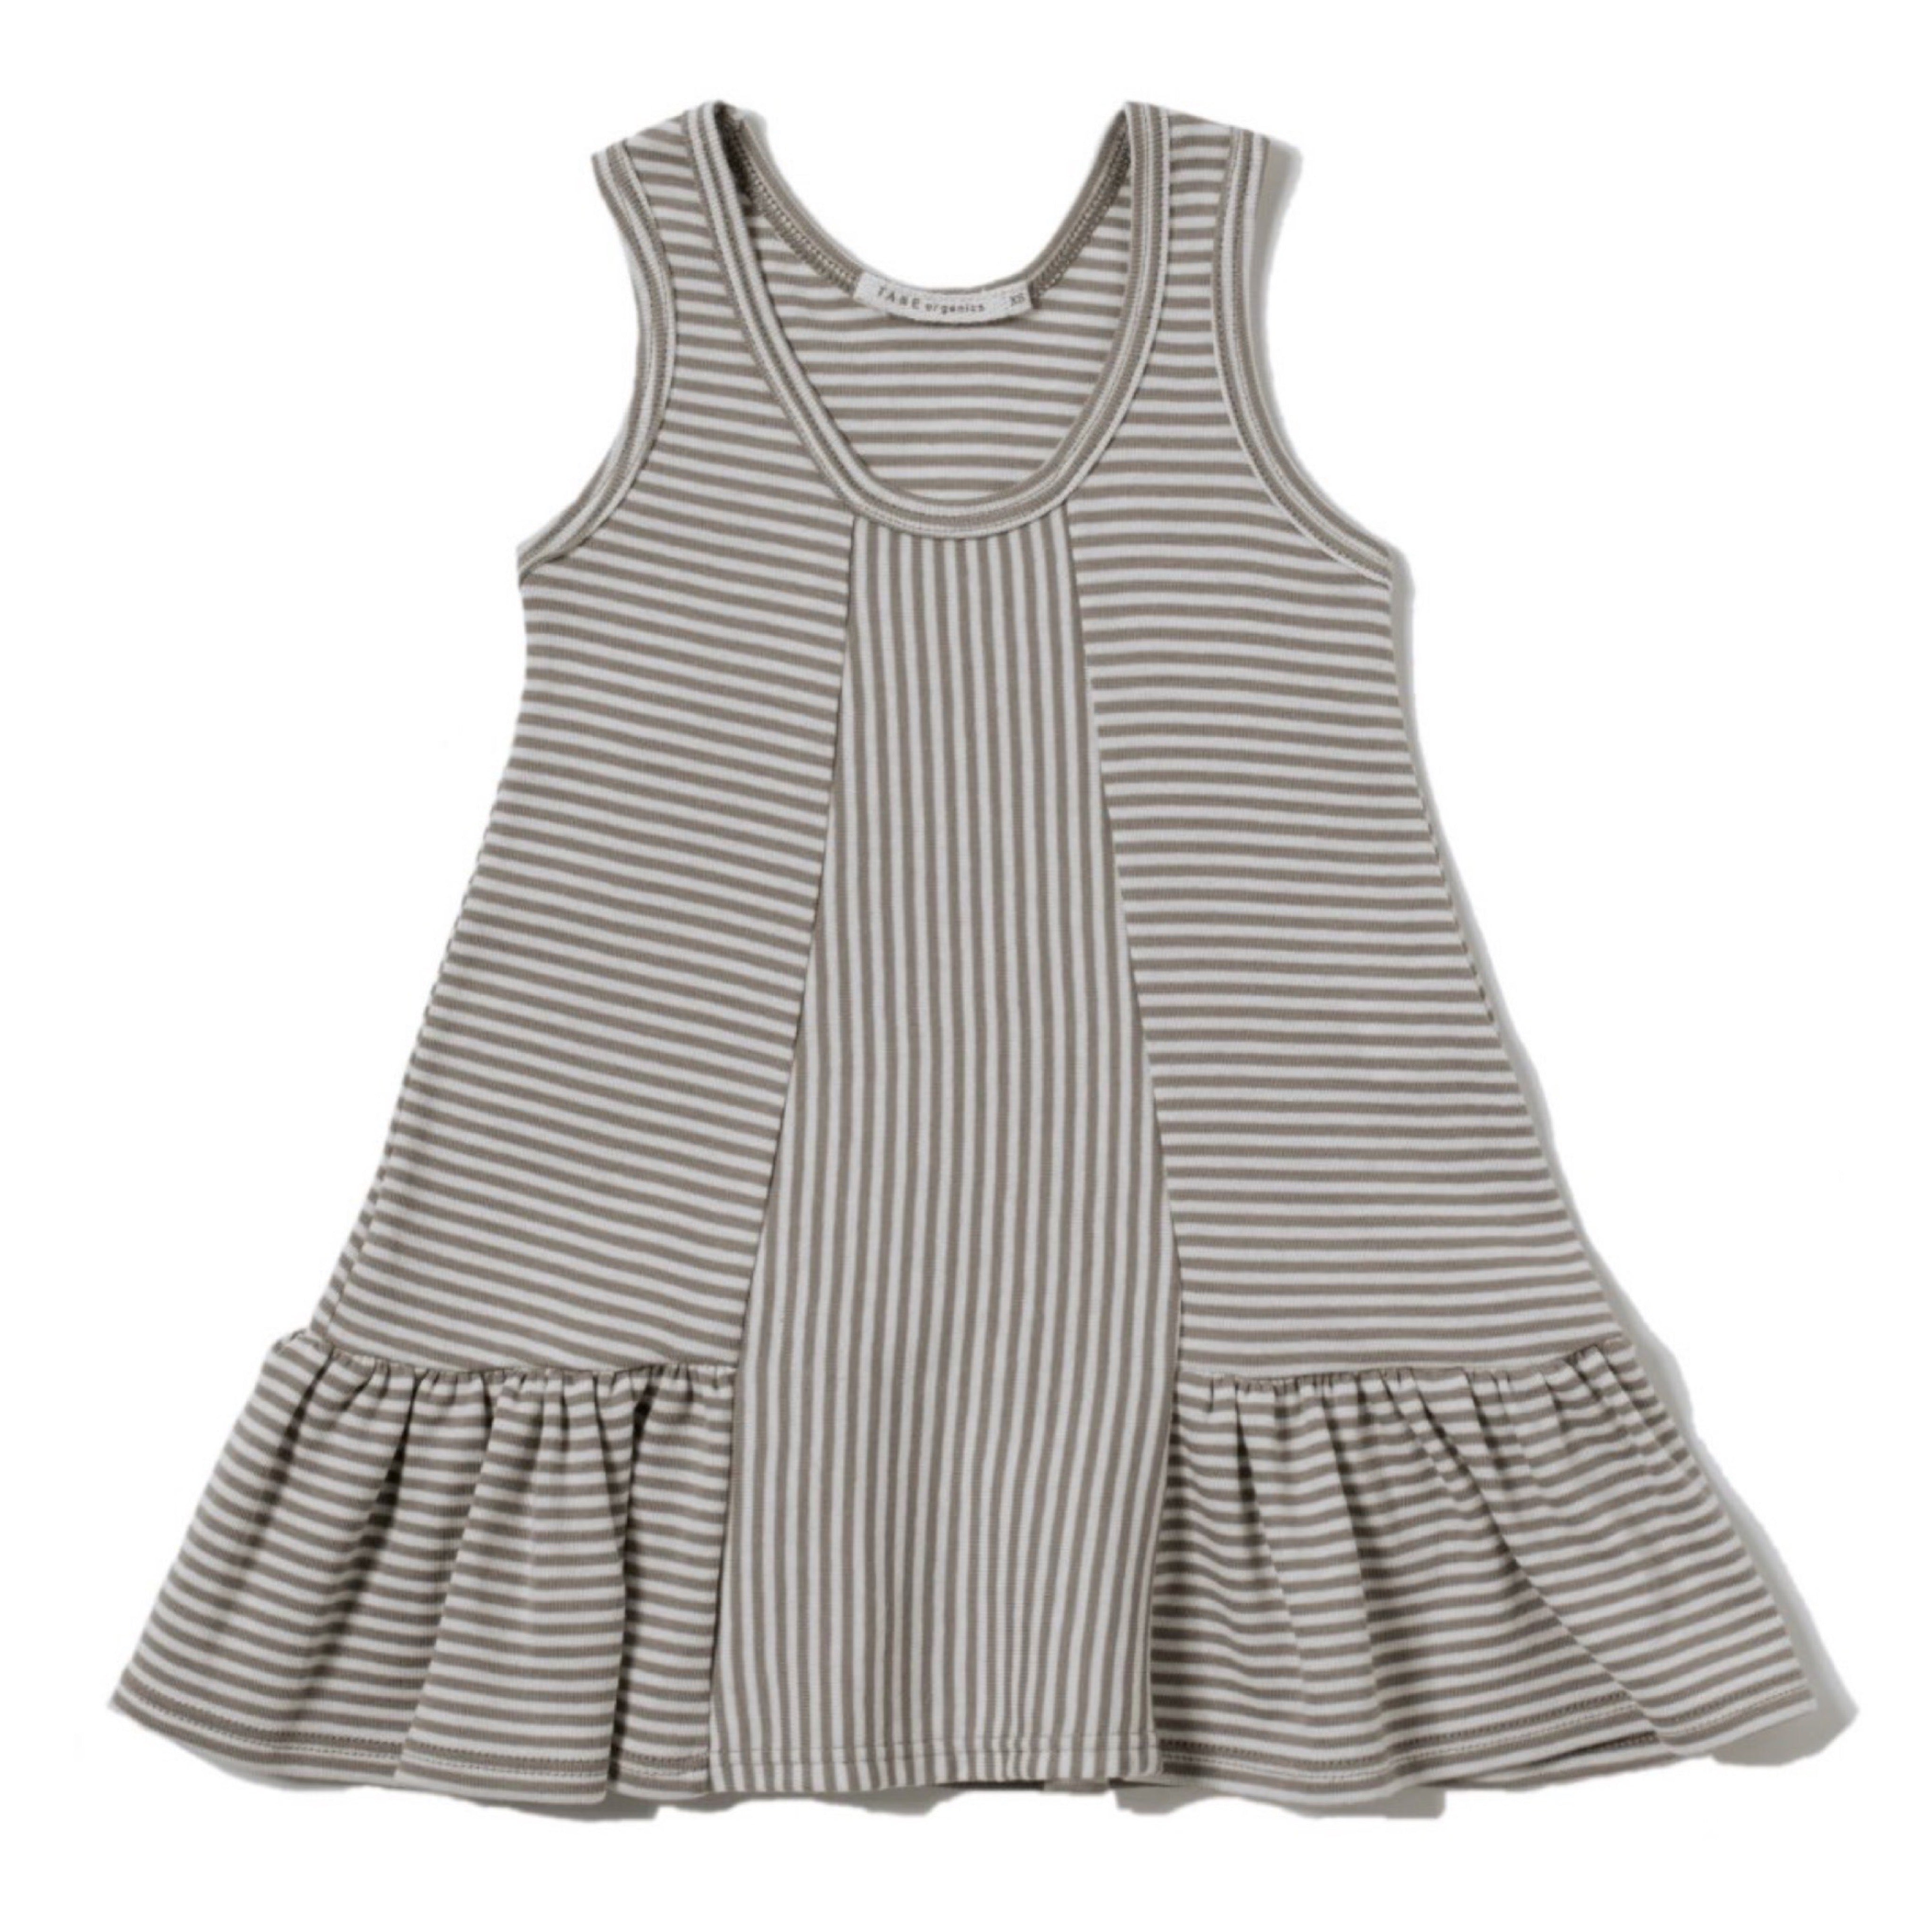 brown and cream color petite stripes sleeveless tank dress with ruffles at hem. Direction play at the center front panel. 100% organic cotton petite stripe knit.